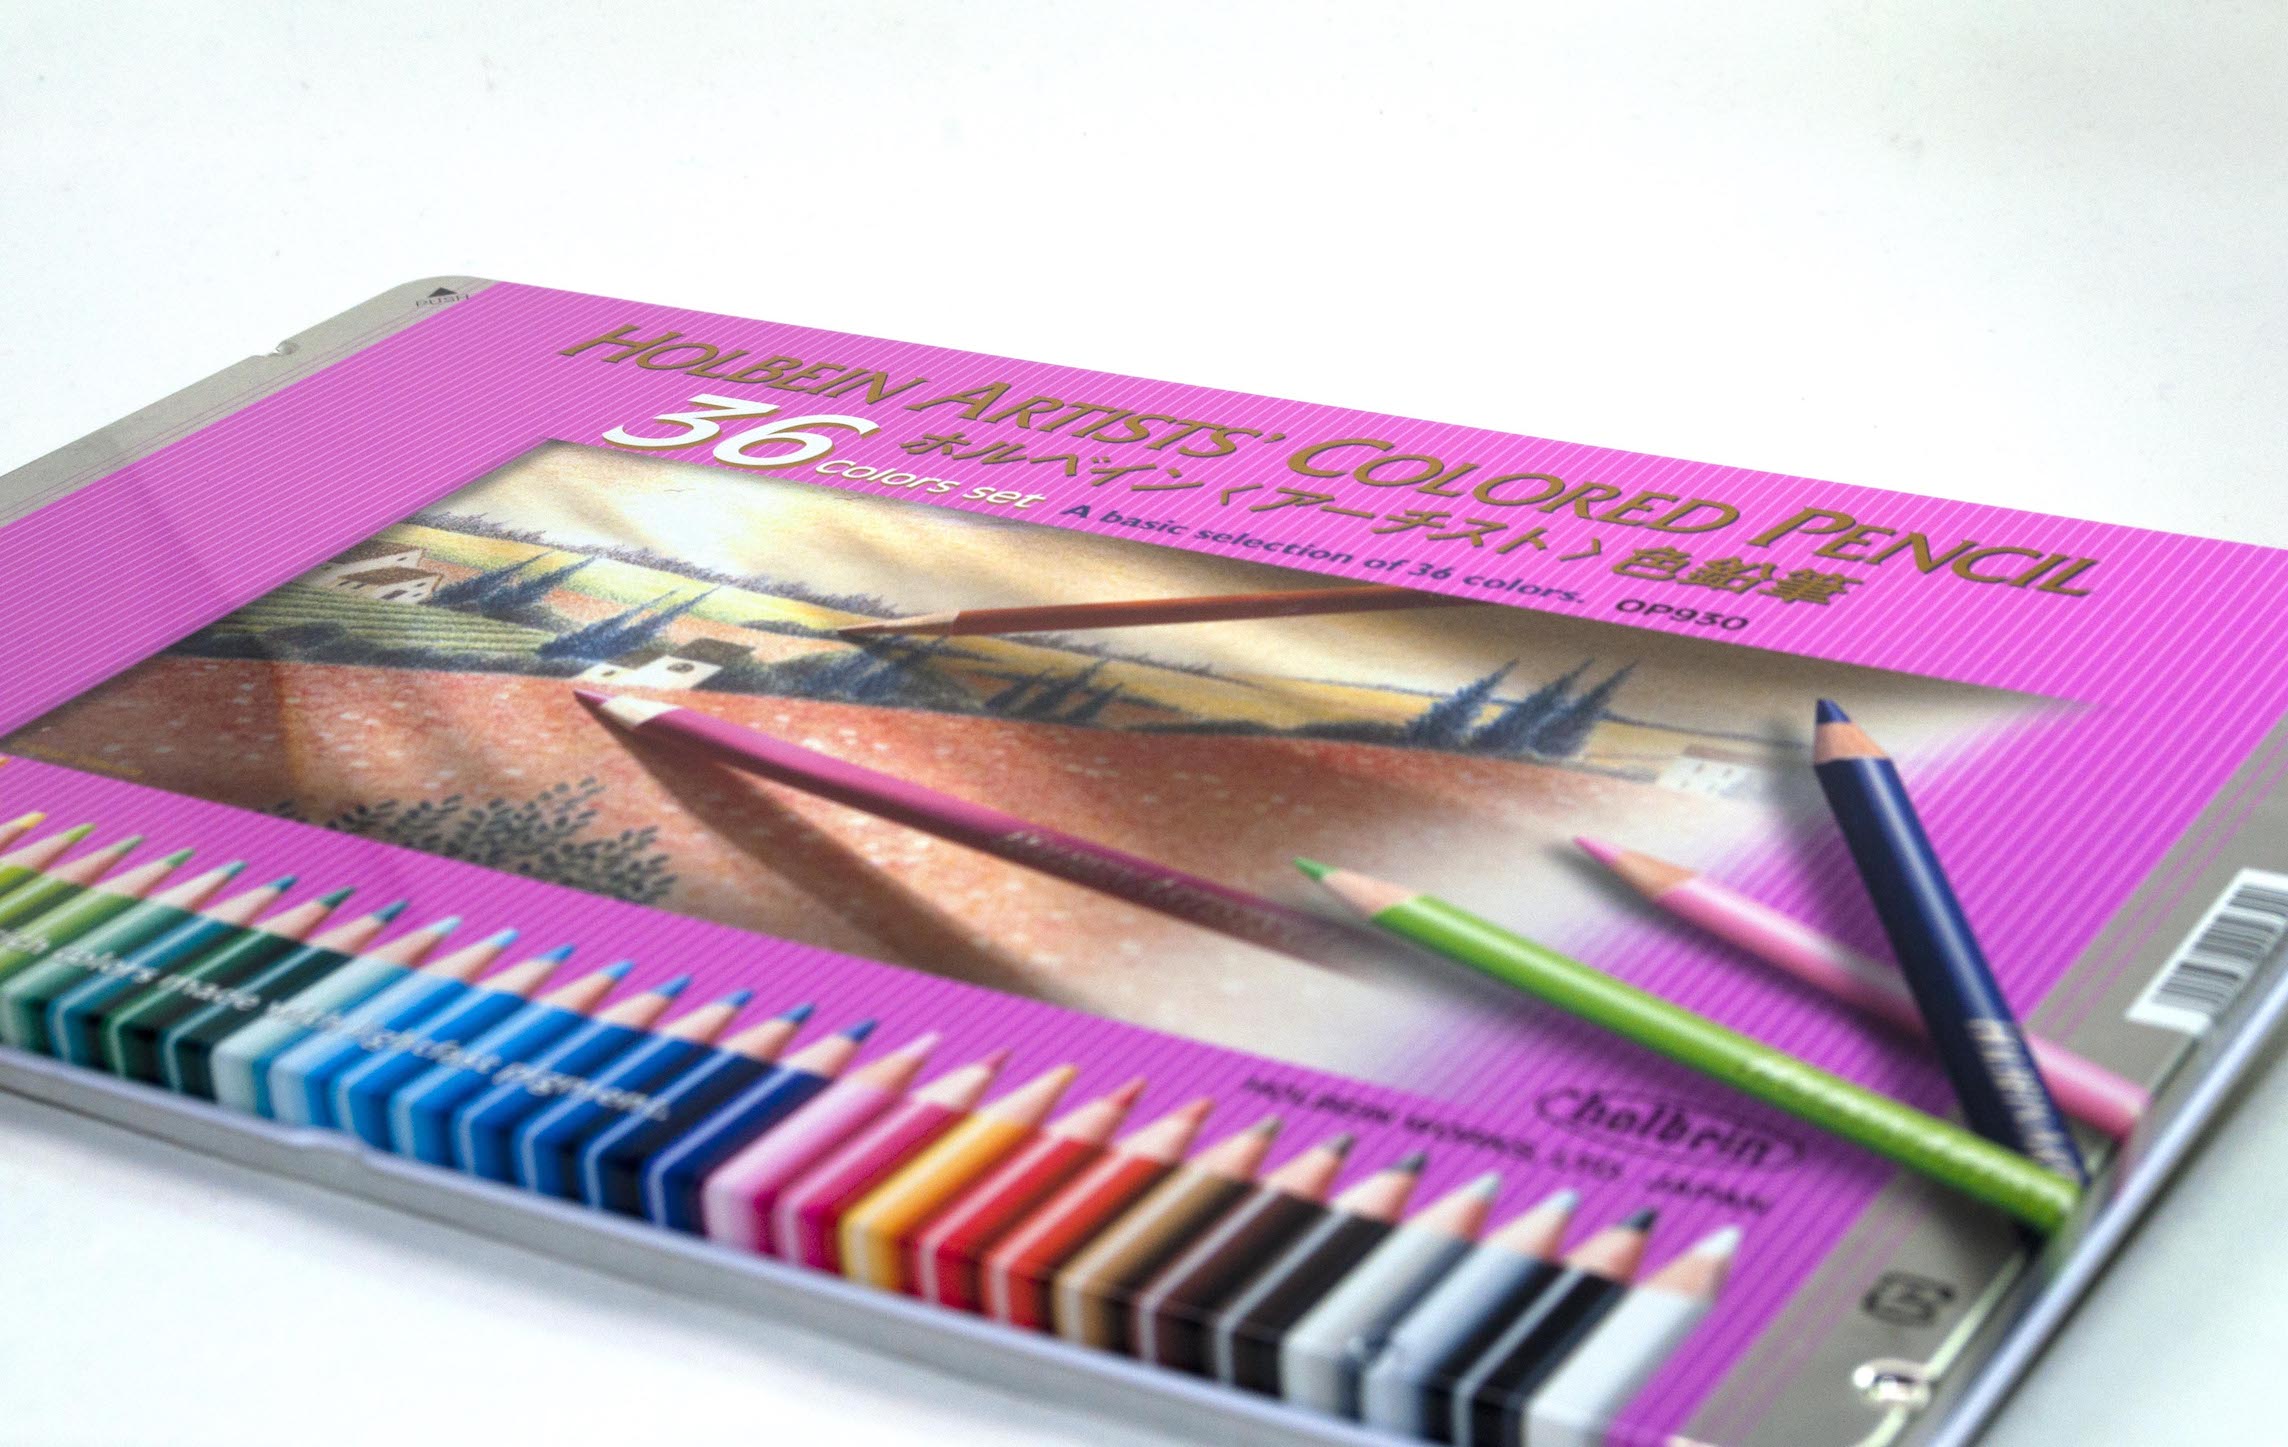 Holbein Artists Colored Pencils Set of 36